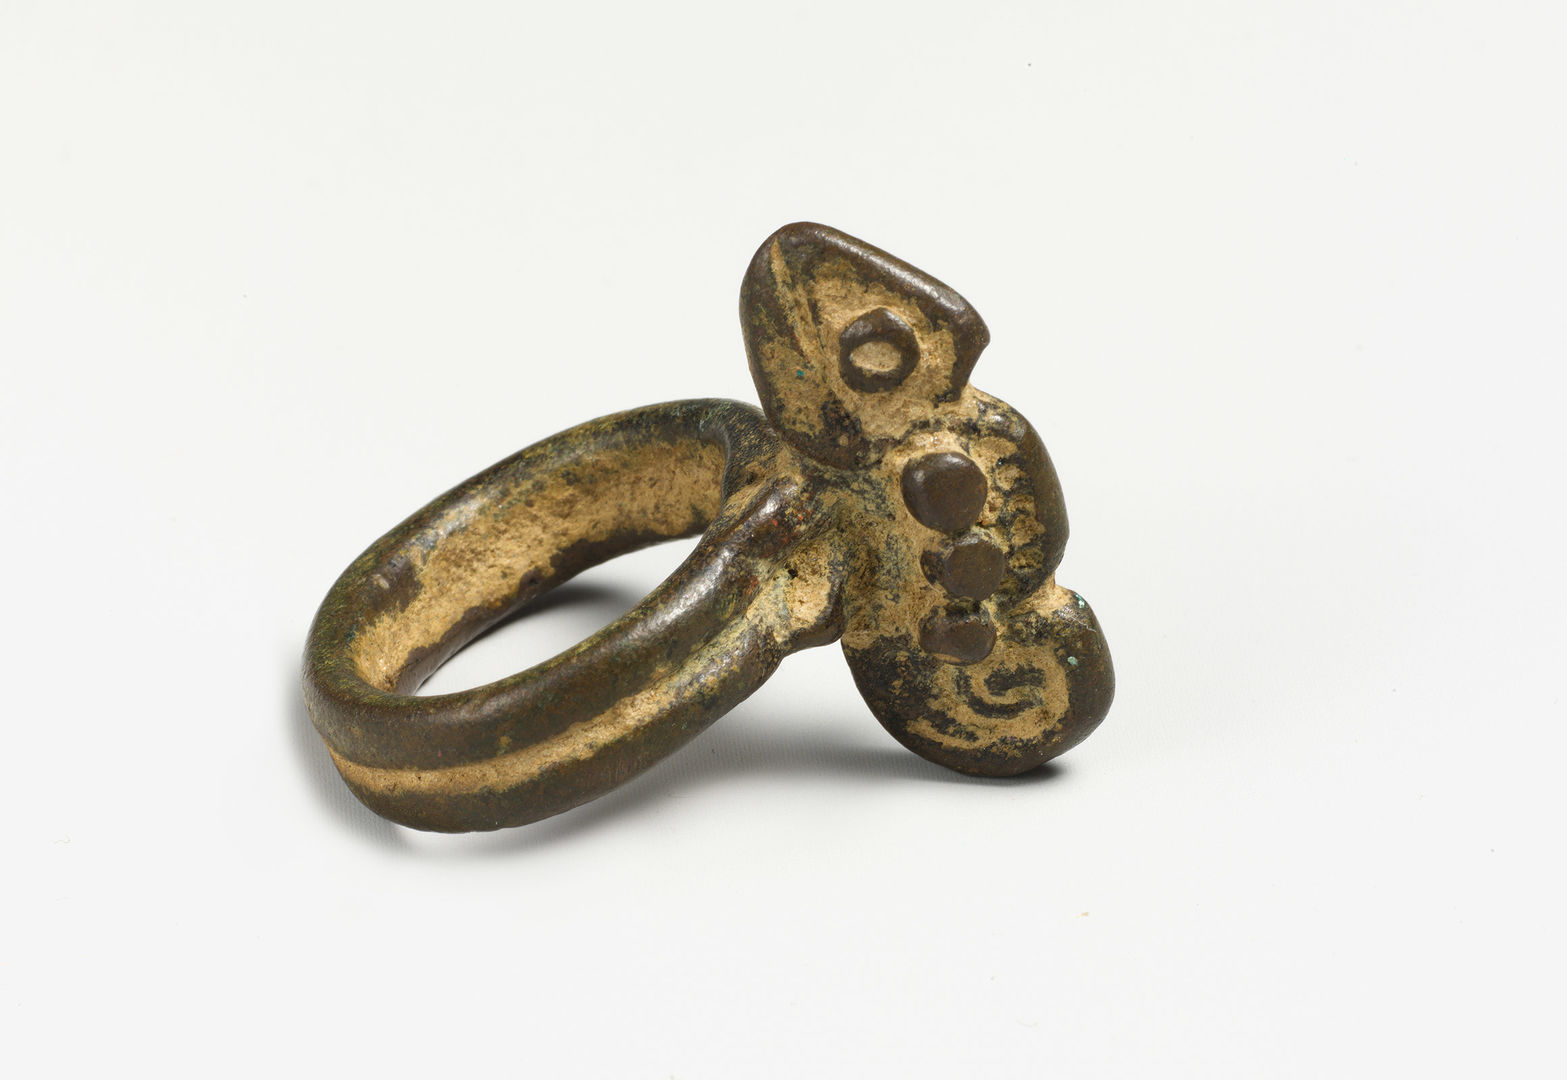 A ring with a chameleon (Yawiige) from 19th–20th century Burkina Faso or Côte d'Ivoire or Mali